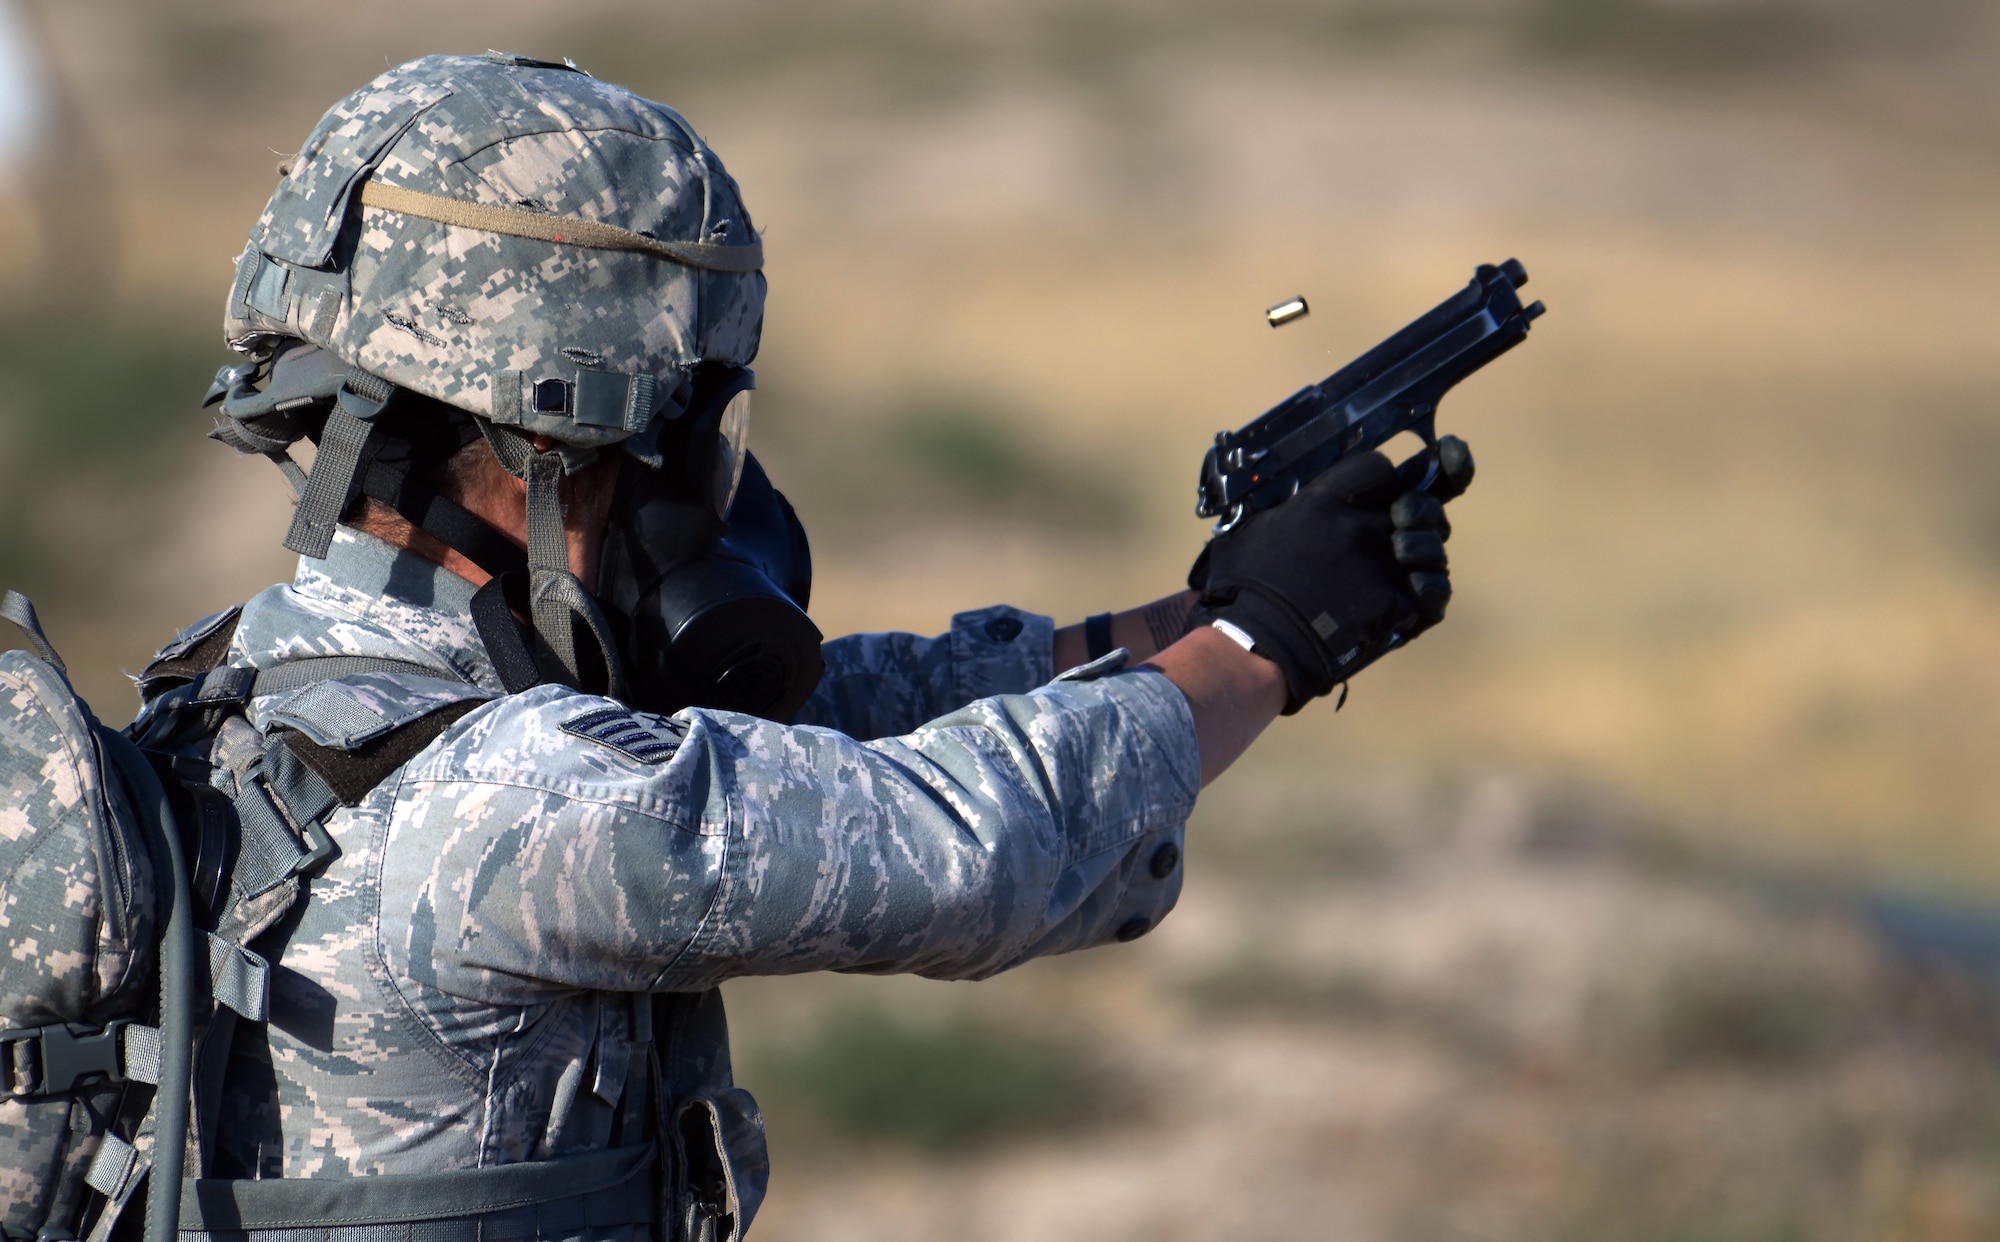 Staff Sgt. Madeline Kappes, 377th Air Base Wing, Kirtland Air Force Base, N.M., shoots at a target with an M-9 pistol while wearing a gas mask Sept. 22, 2015, during the shooting range portion of the 2015 Global Strike Challenge security forces competition on Camp Guernsey, Wyo. Airmen had to be able put on a gas mask at any time during the competition and still perform all of the requested duties. (U.S. Air Force photo by Senior Airman Brandon Valle)